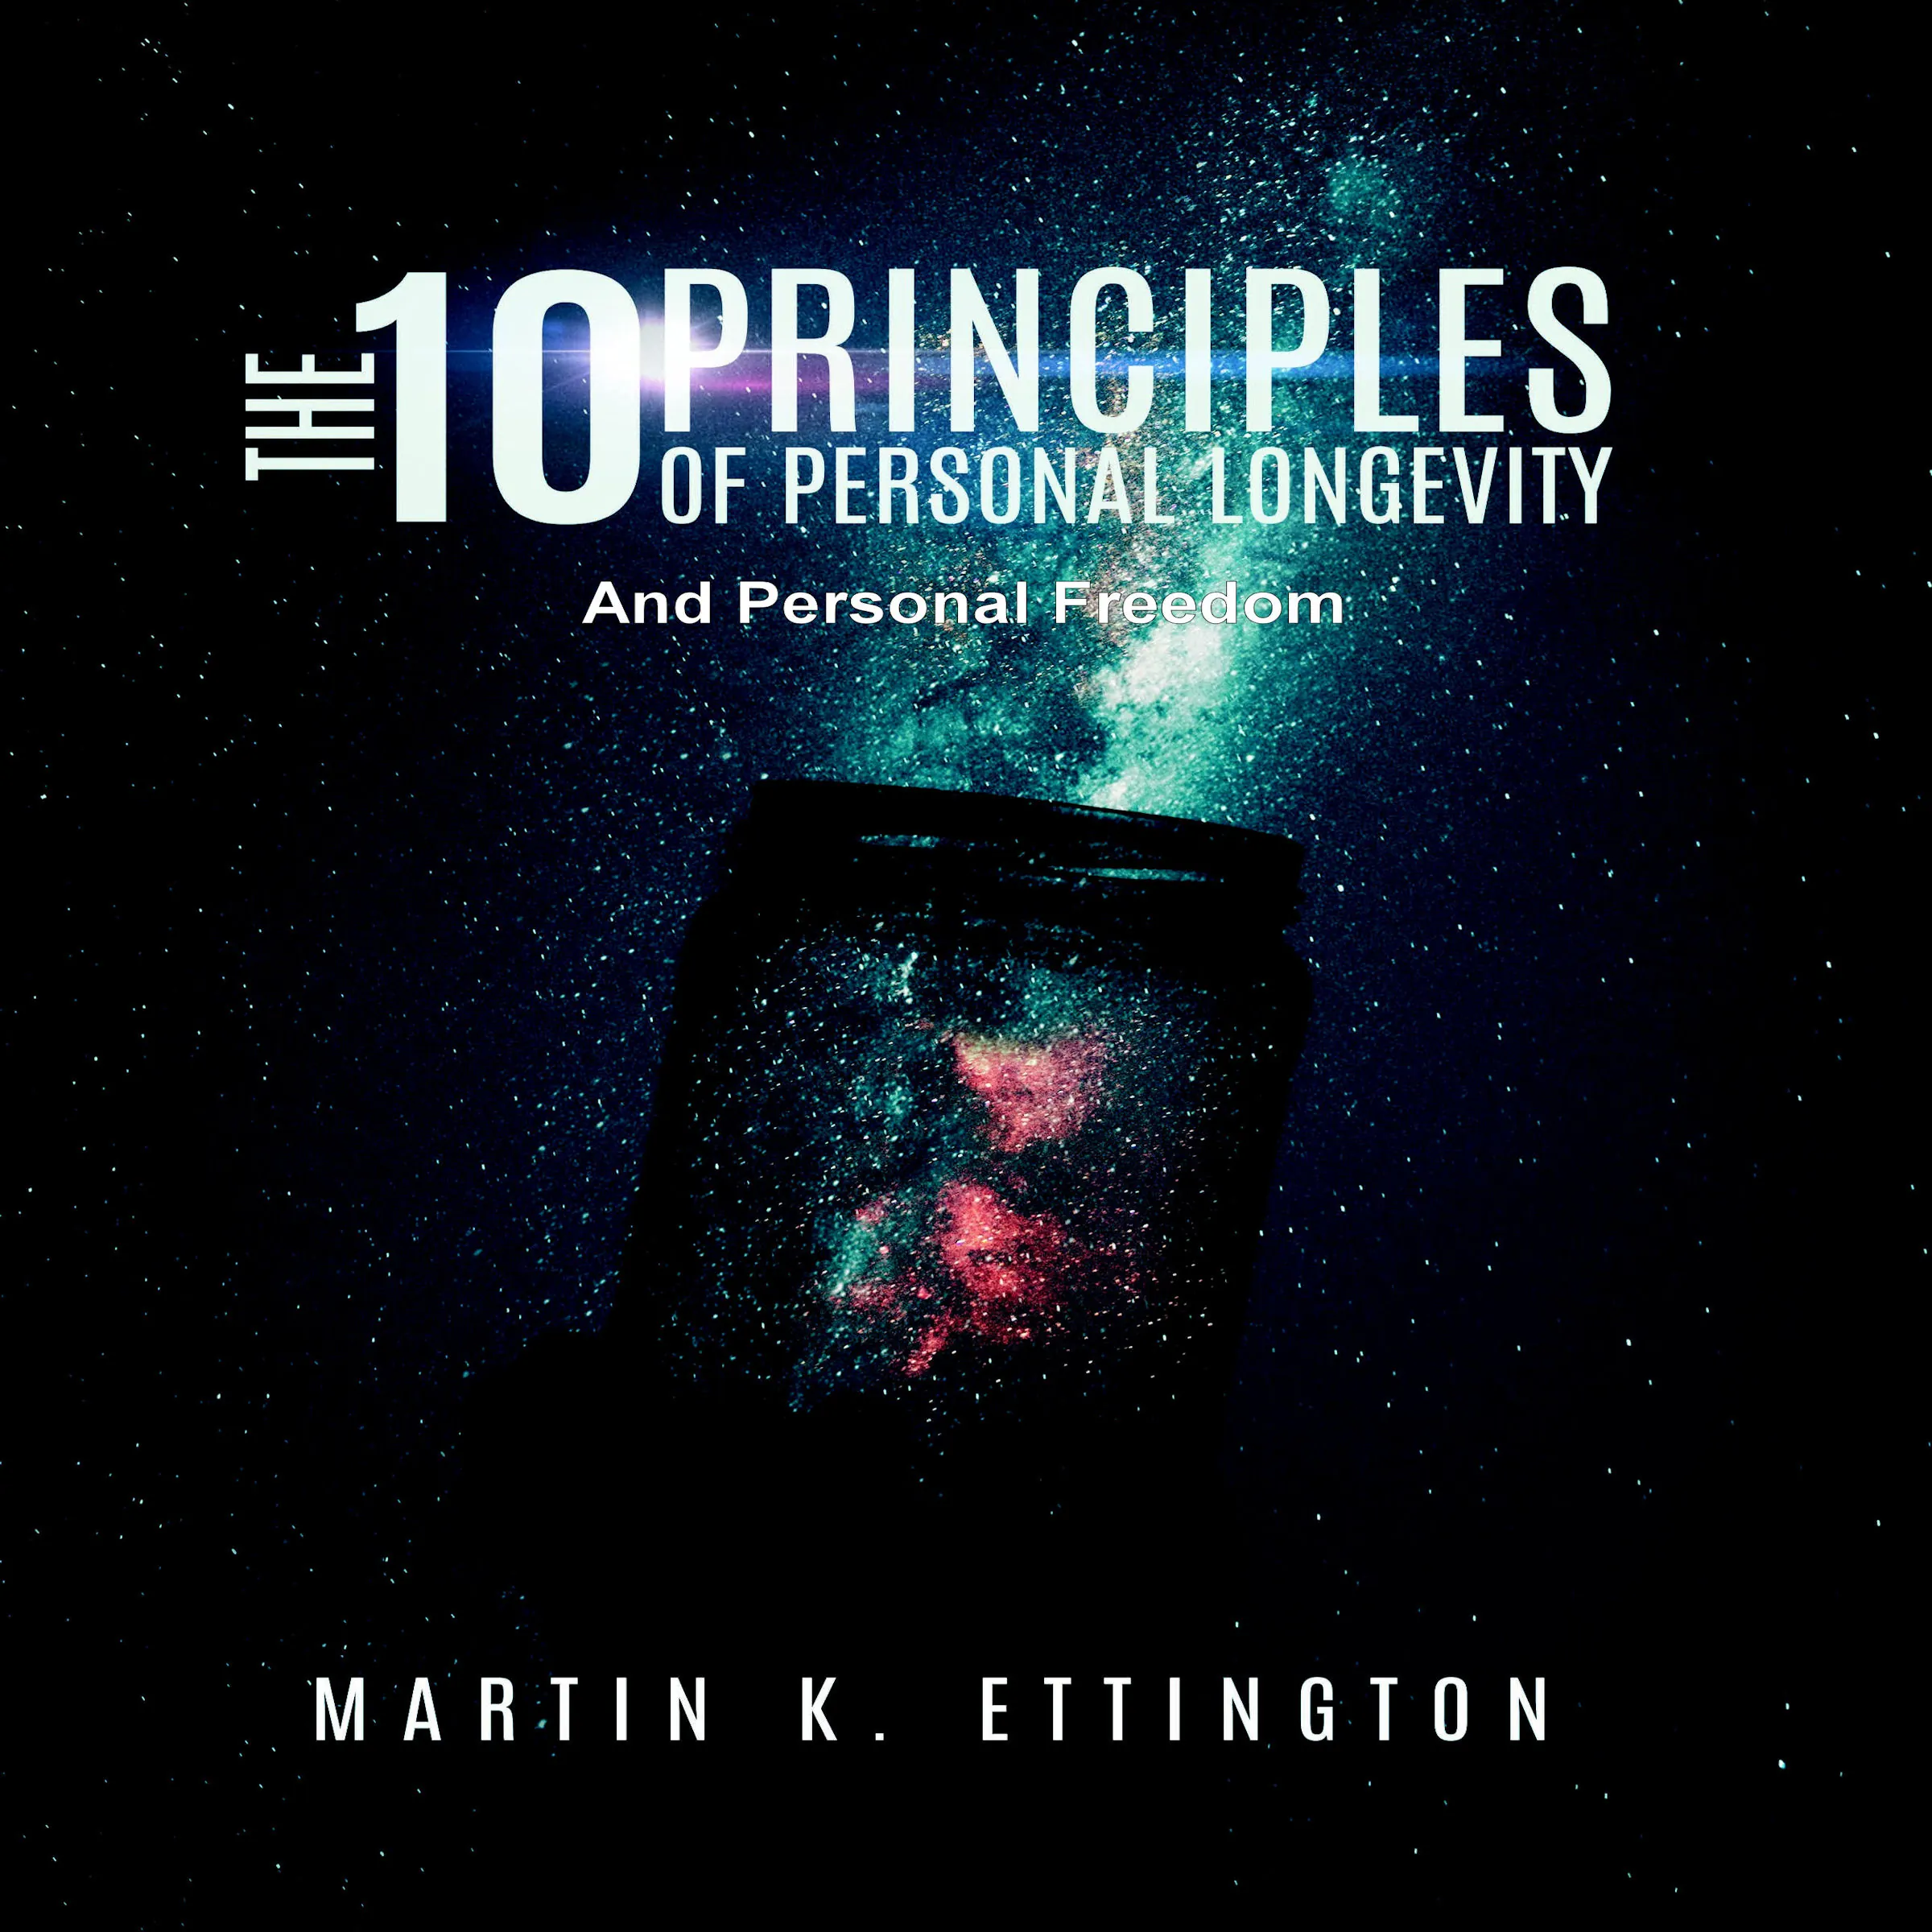 The 10 Principles of Personal Longevity and Personal Freedom Audiobook by Martin K. Ettington